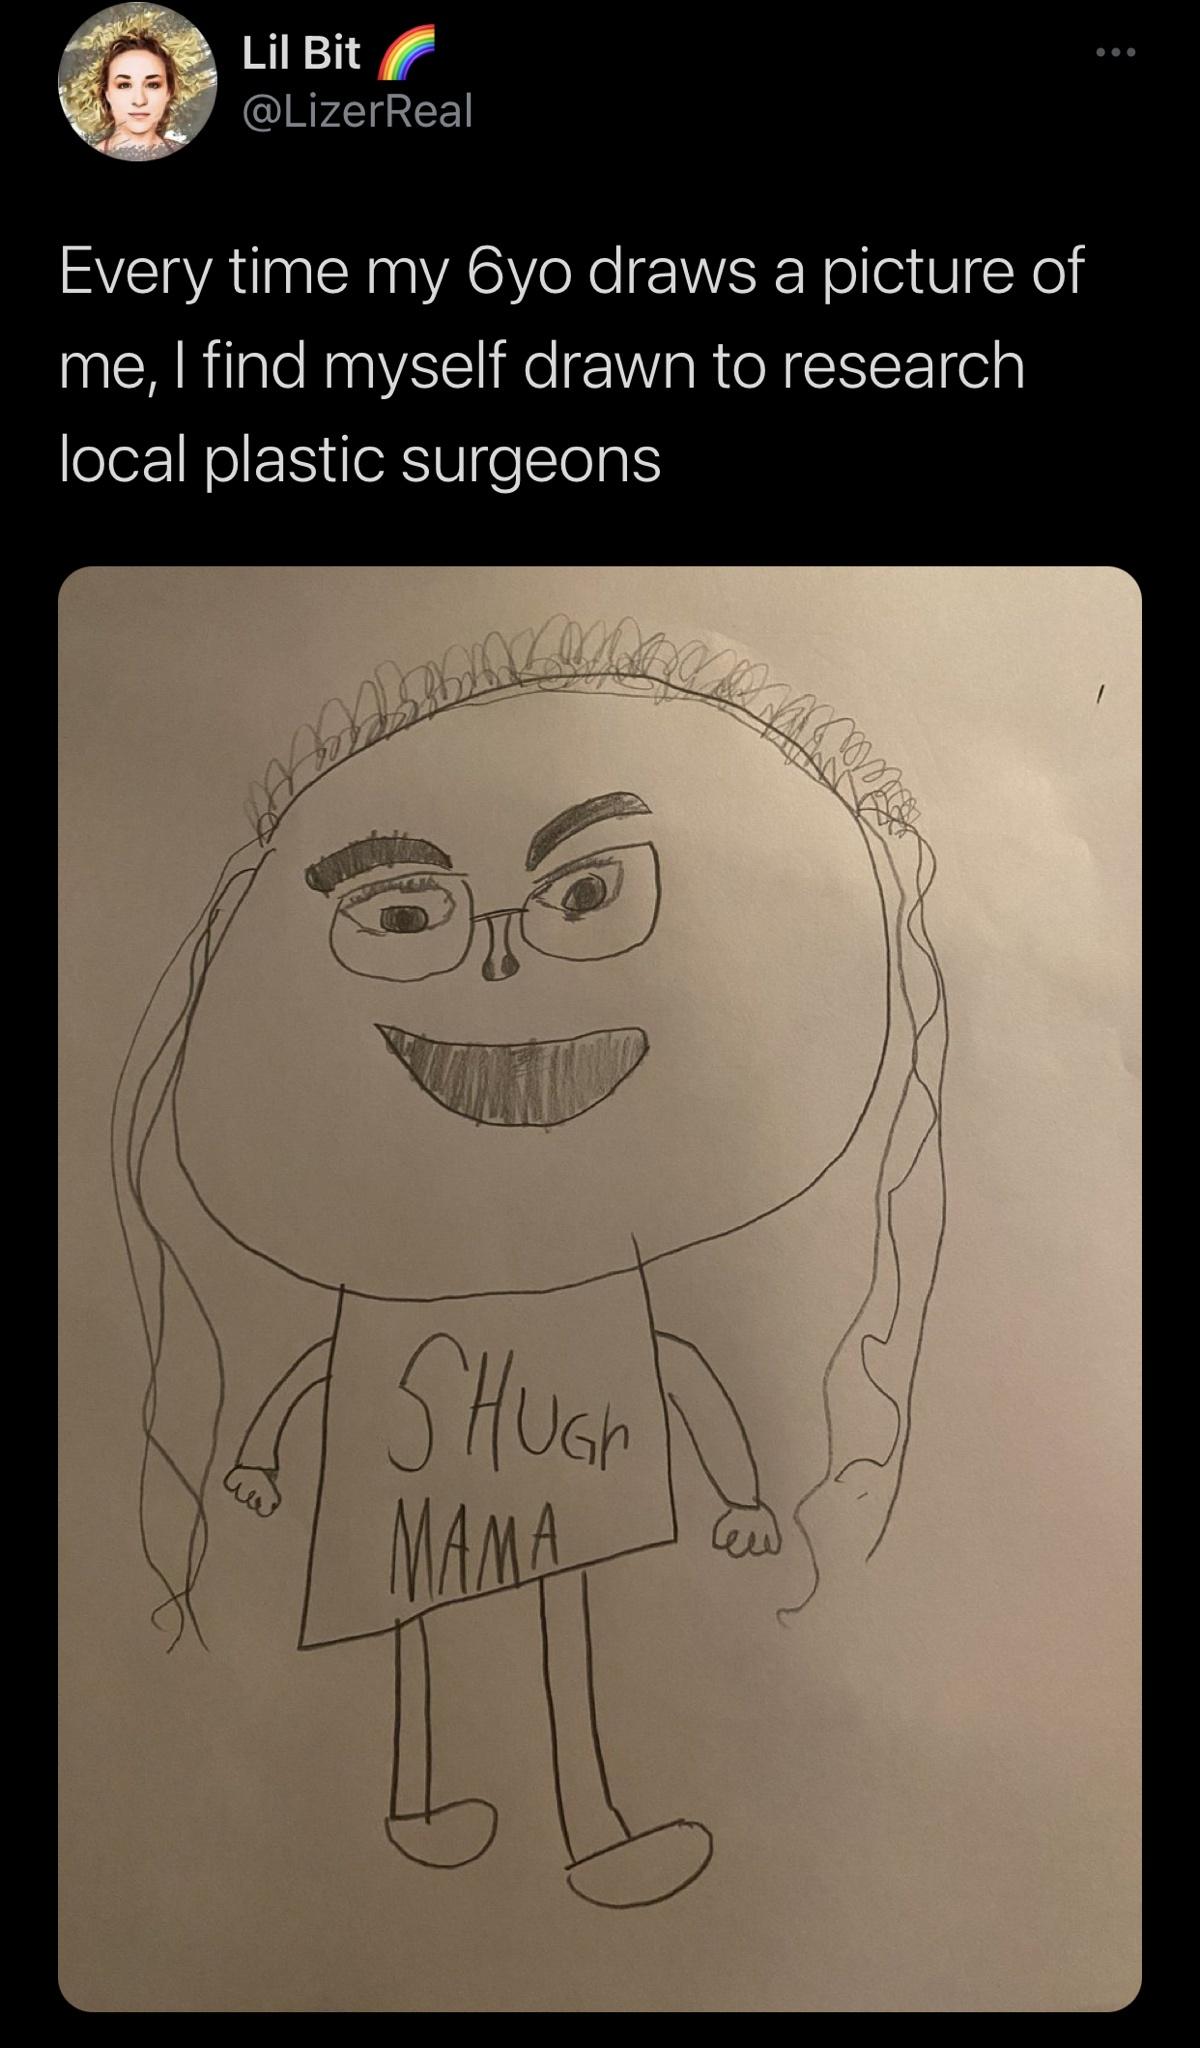 funny tweets and memes - cartoon - Lil Bit Every time my 6yo draws a picture of me, I find myself drawn to research local plastic surgeons Shugh Mama